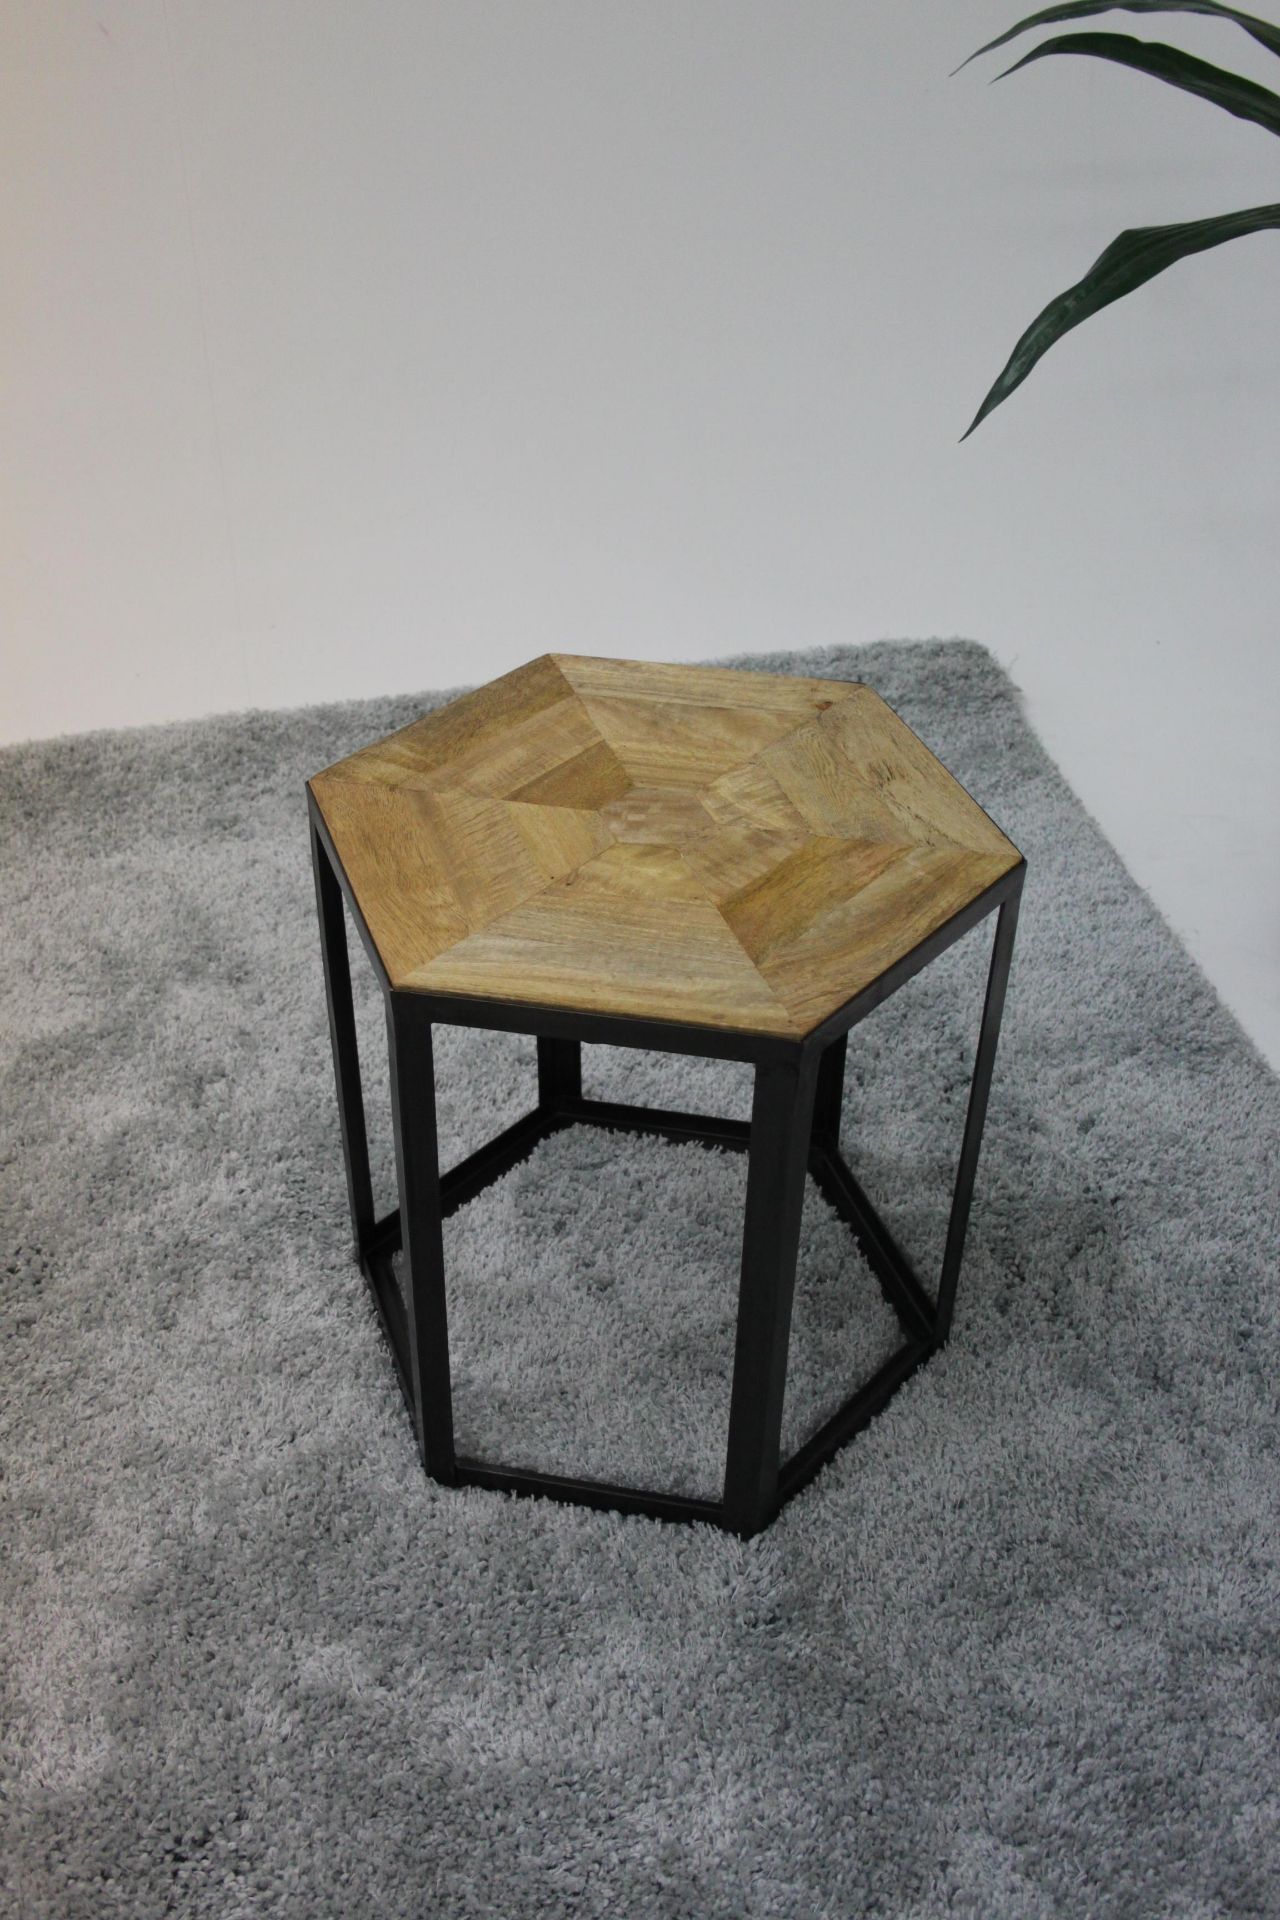 Octagon Bunching Table Antique Natural Wood Solid White Metal An Octagon Shaped Side Table With An - Image 2 of 3